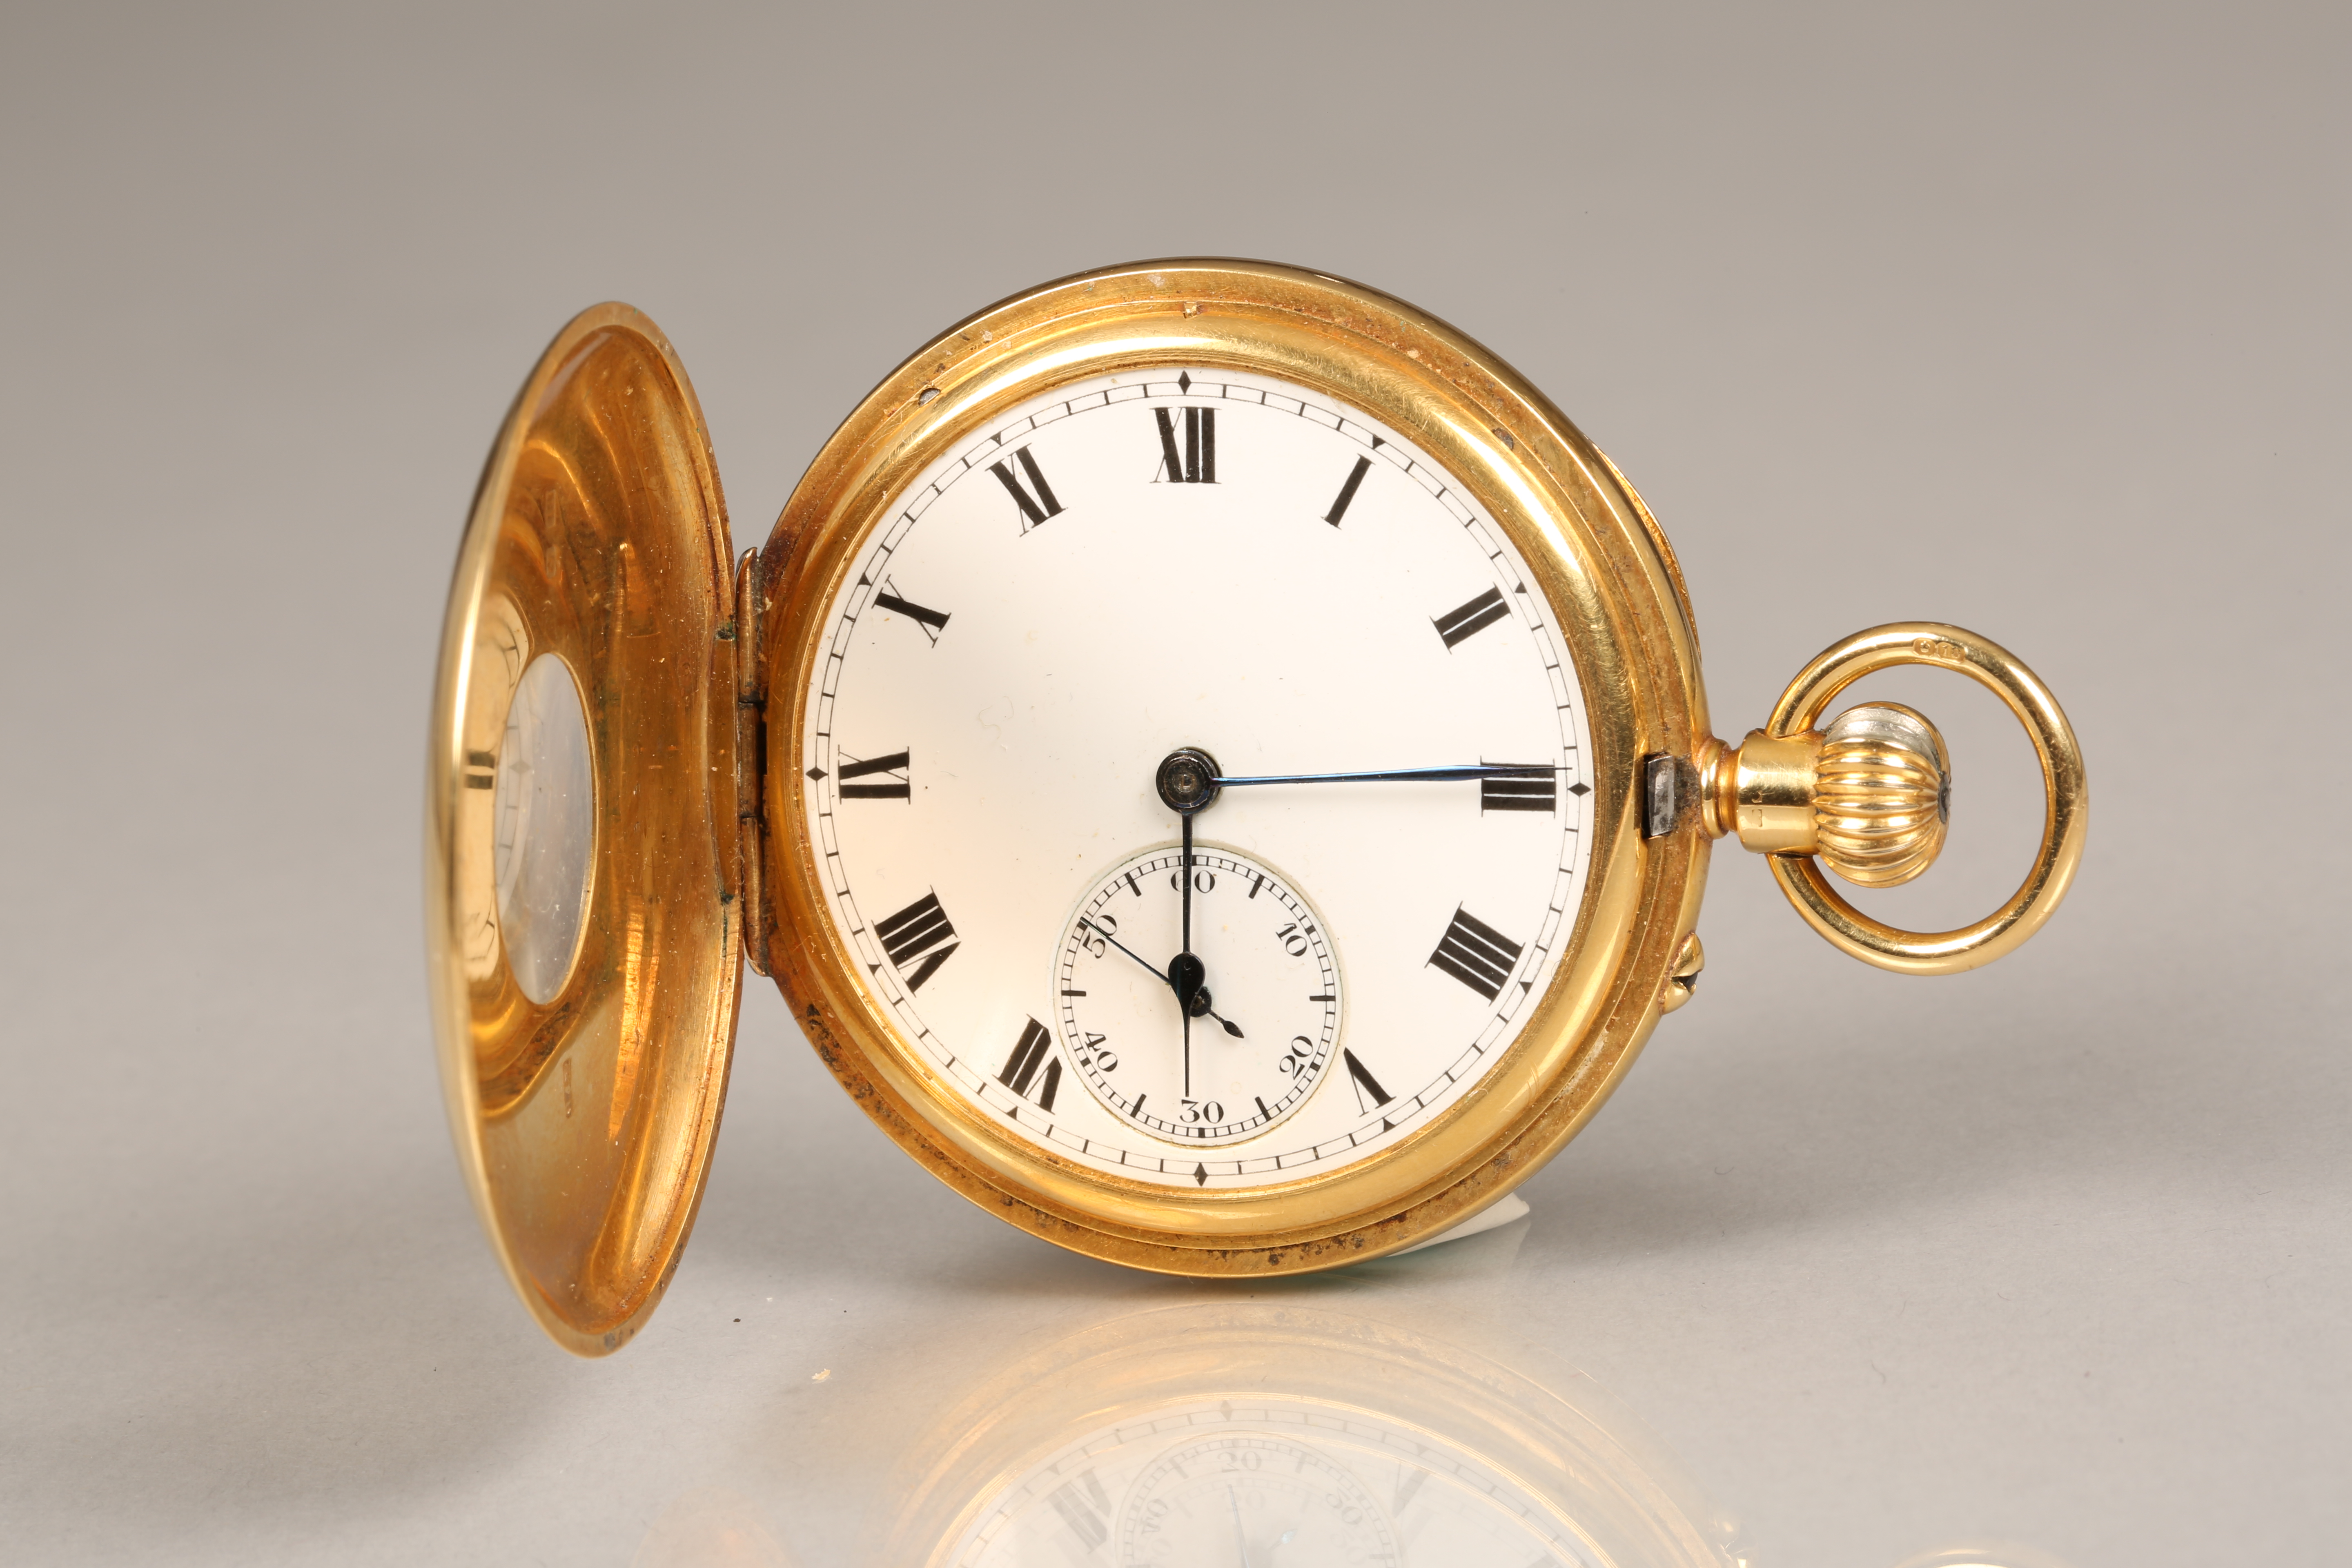 Gents 18 carat gold cased half hunter pocket watch with subsidary dial, blue steel hands with